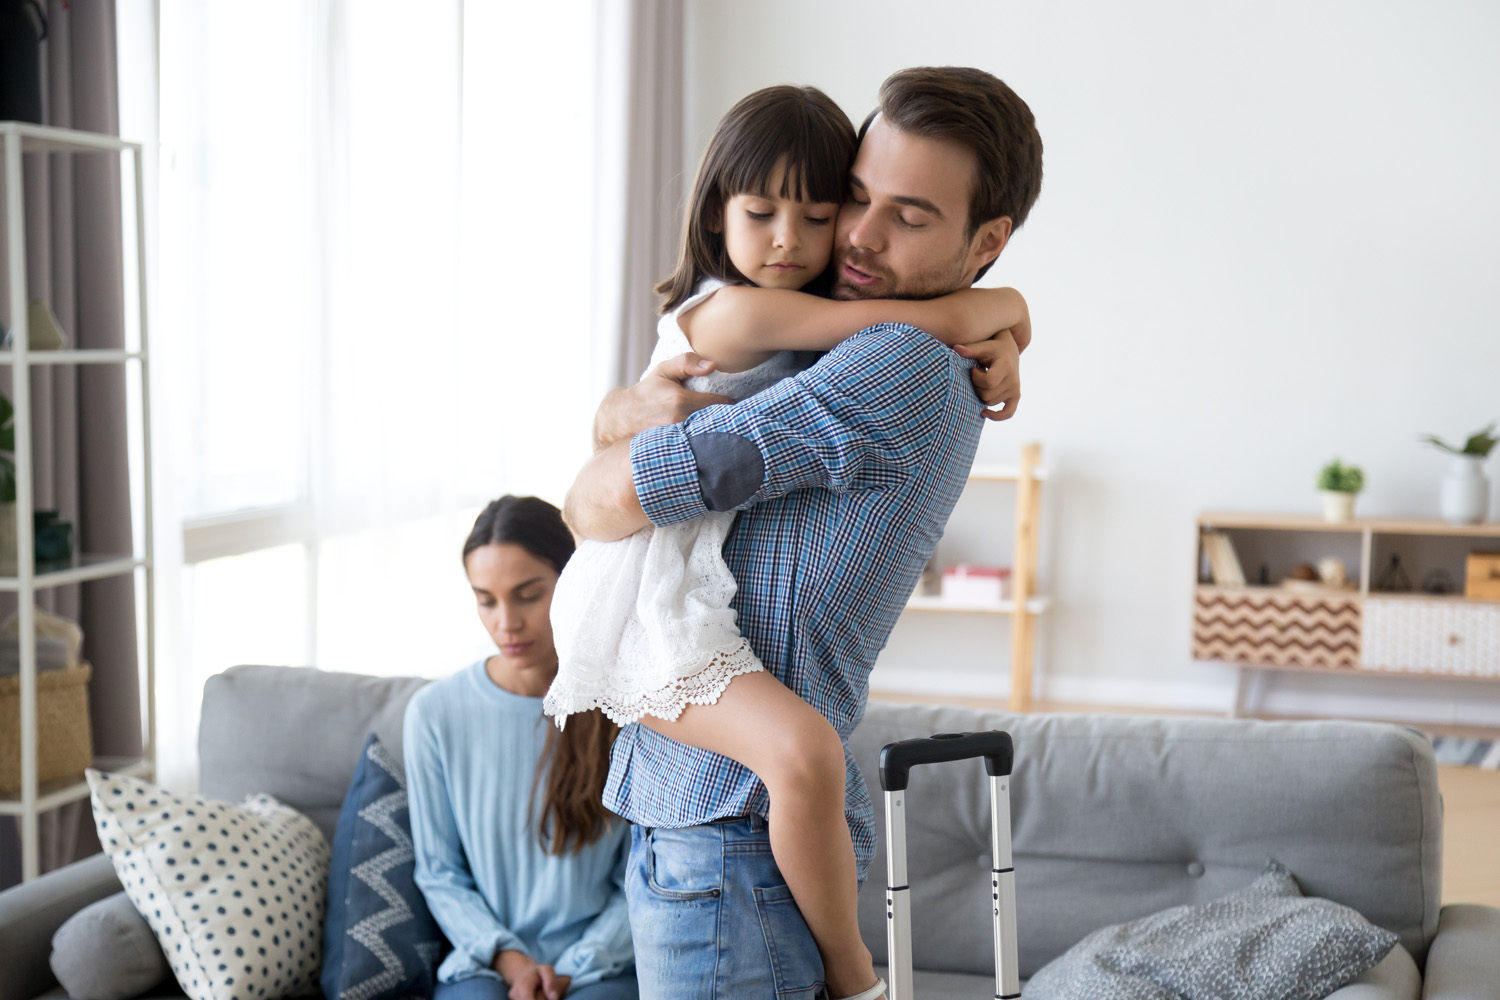 Can Child Custody Be Re-Negotiated in California?